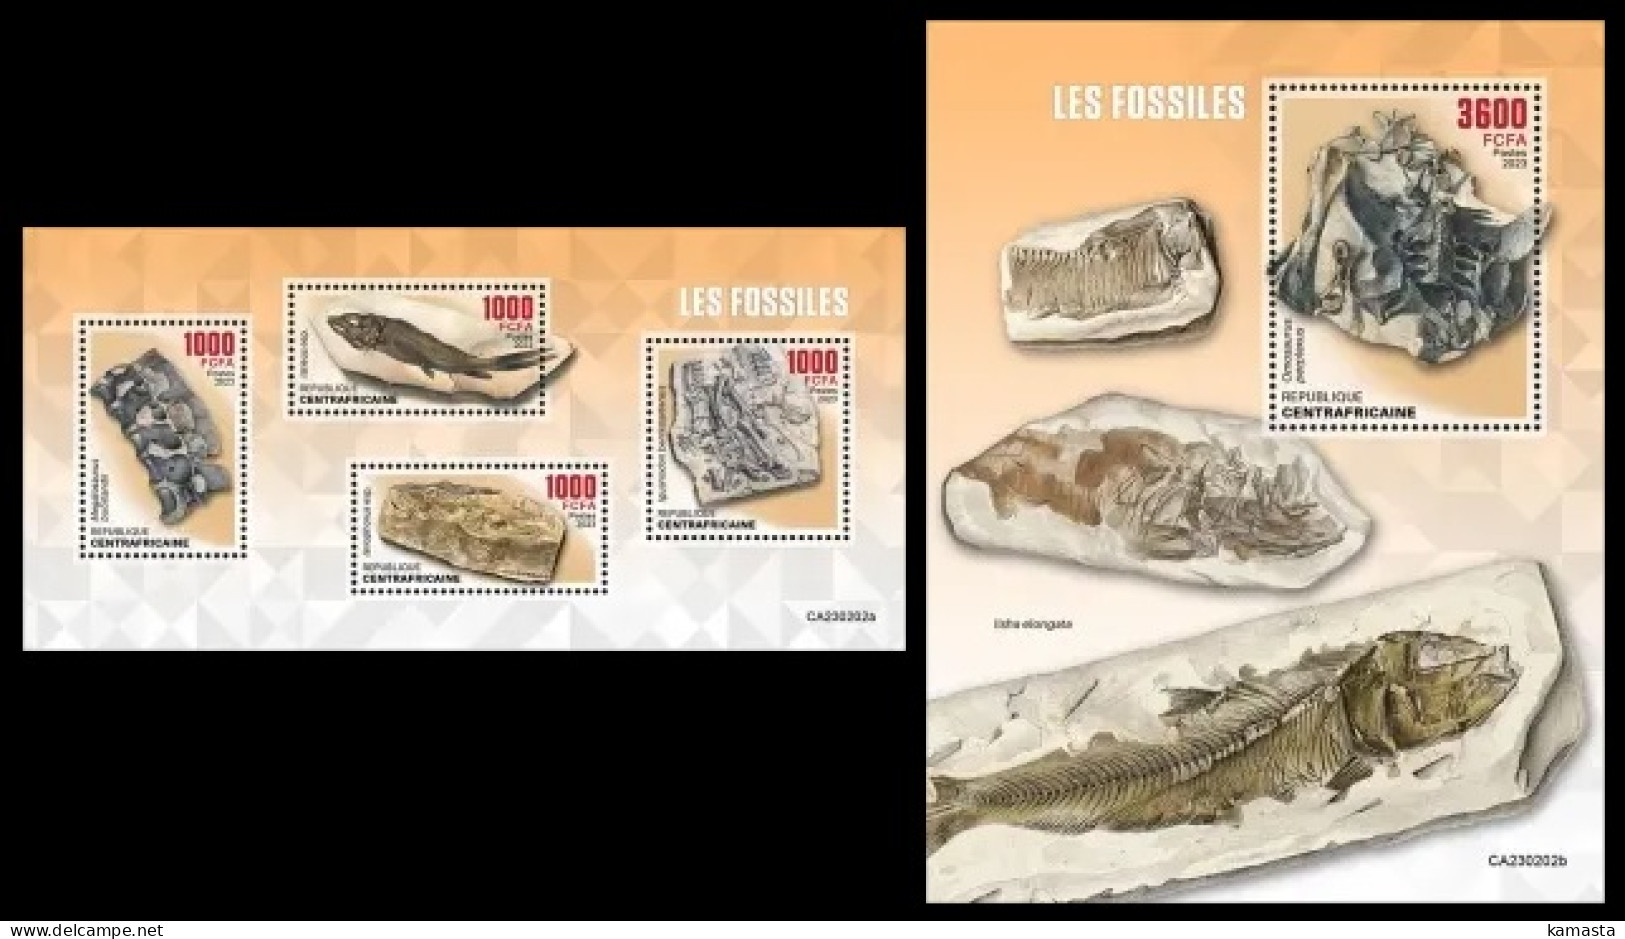 Central Africa 2023 Fossils. (202) OFFICIAL ISSUE - Fossils